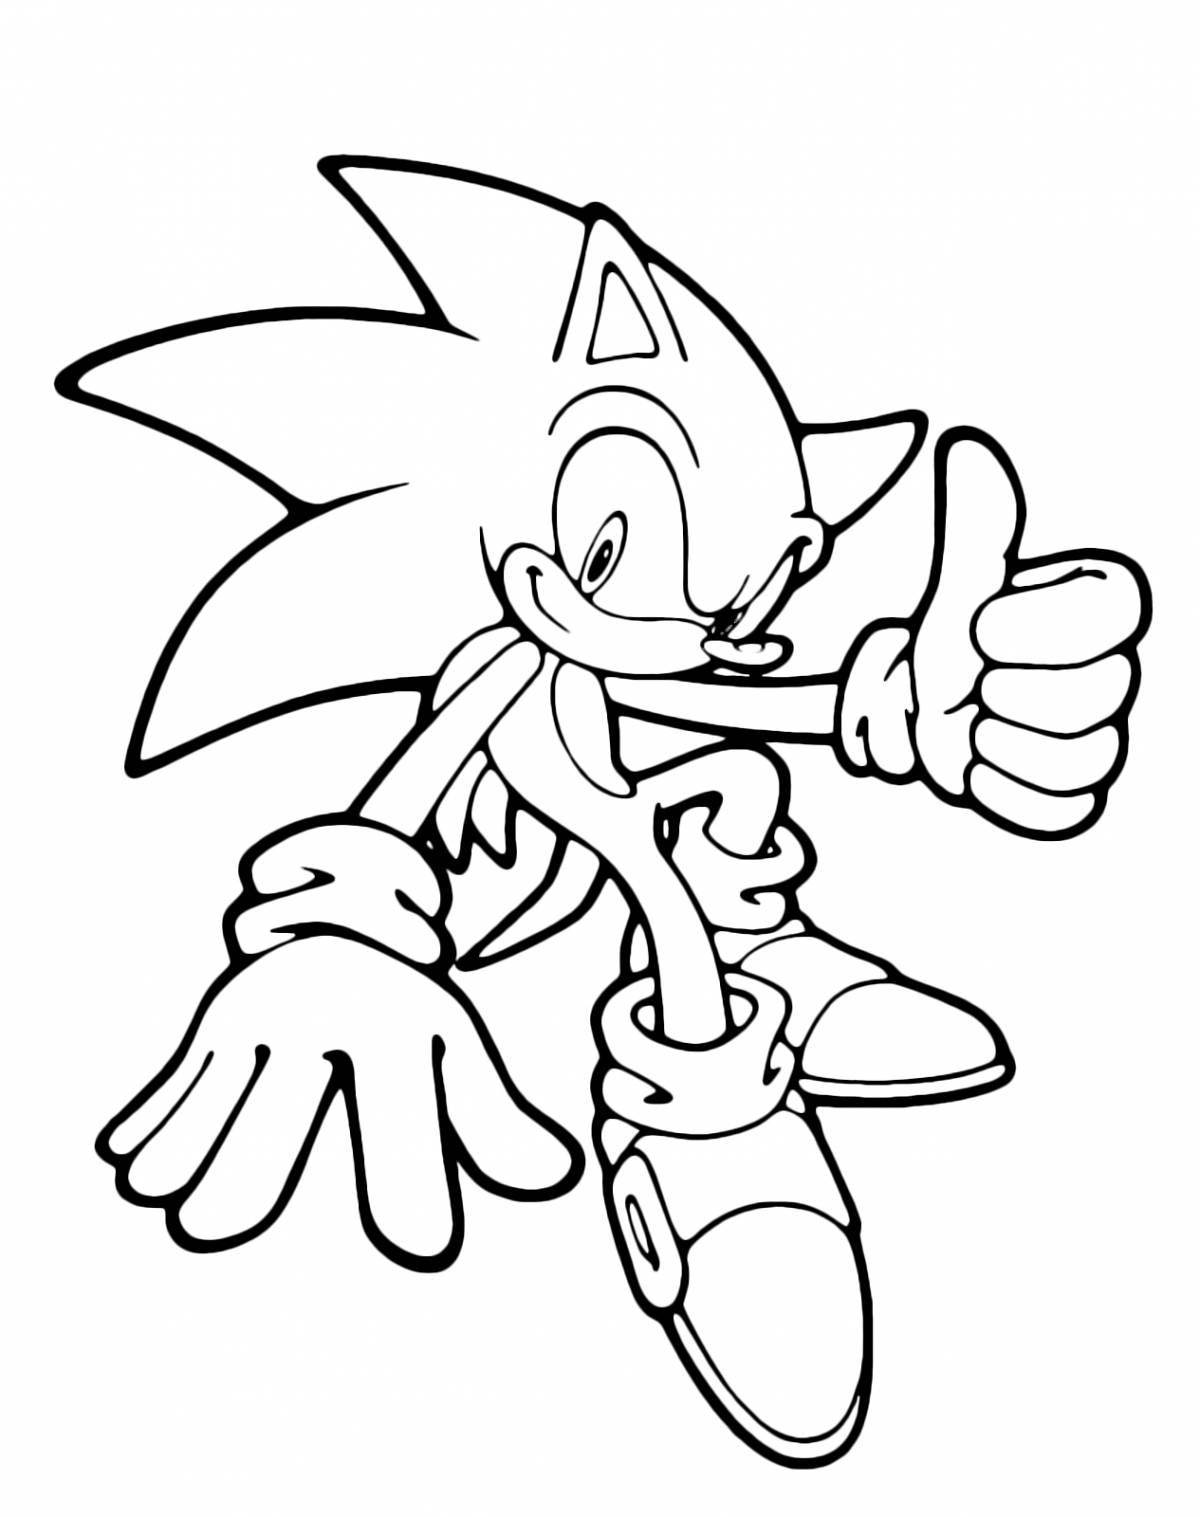 Sonic hedgehog mystery coloring book